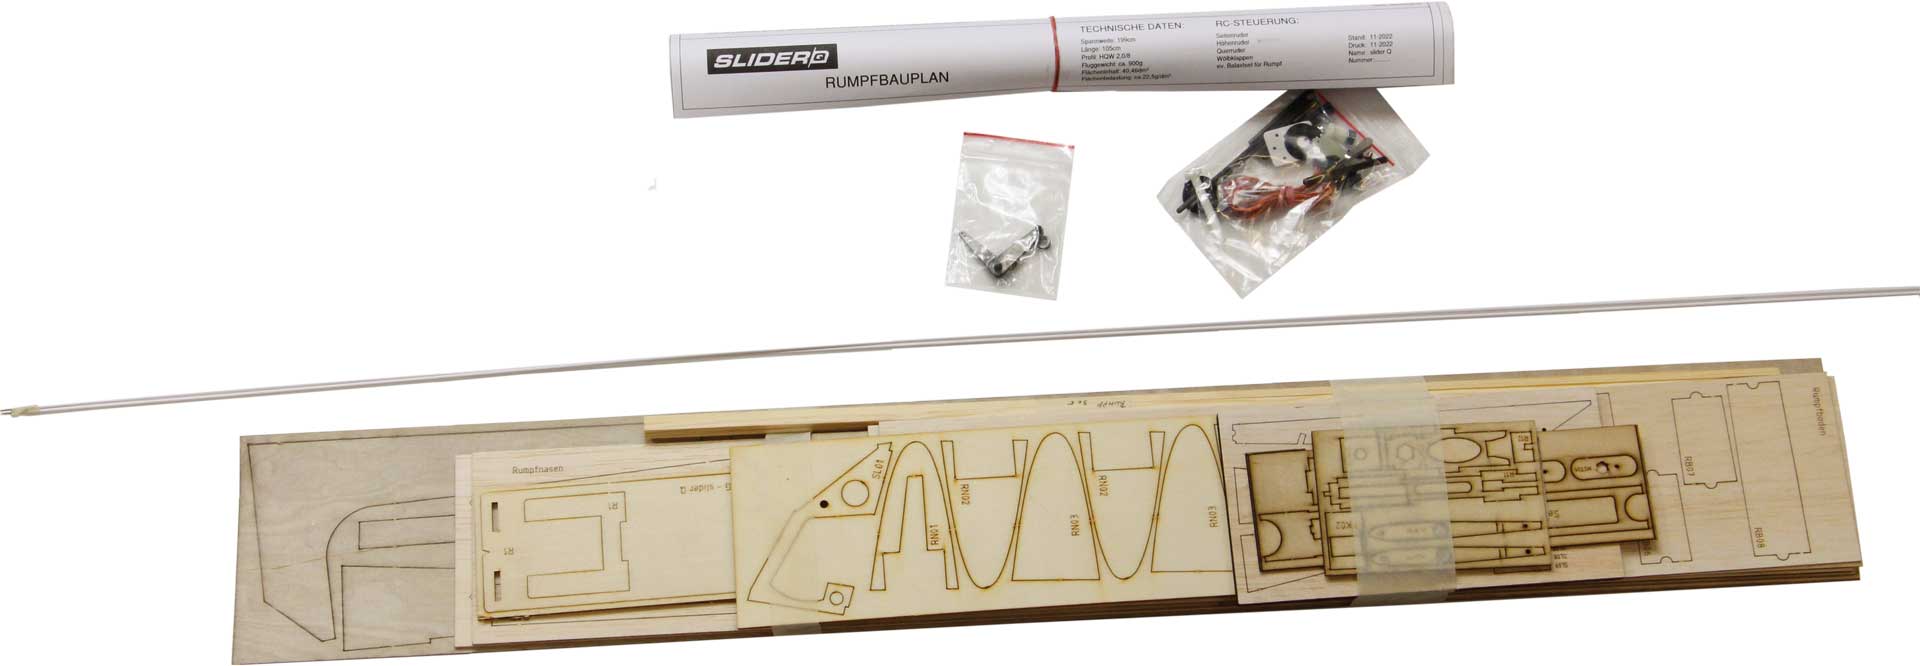 Robbe Modellsport Fuselage kit / wooden parts set Slider Q with tail unit